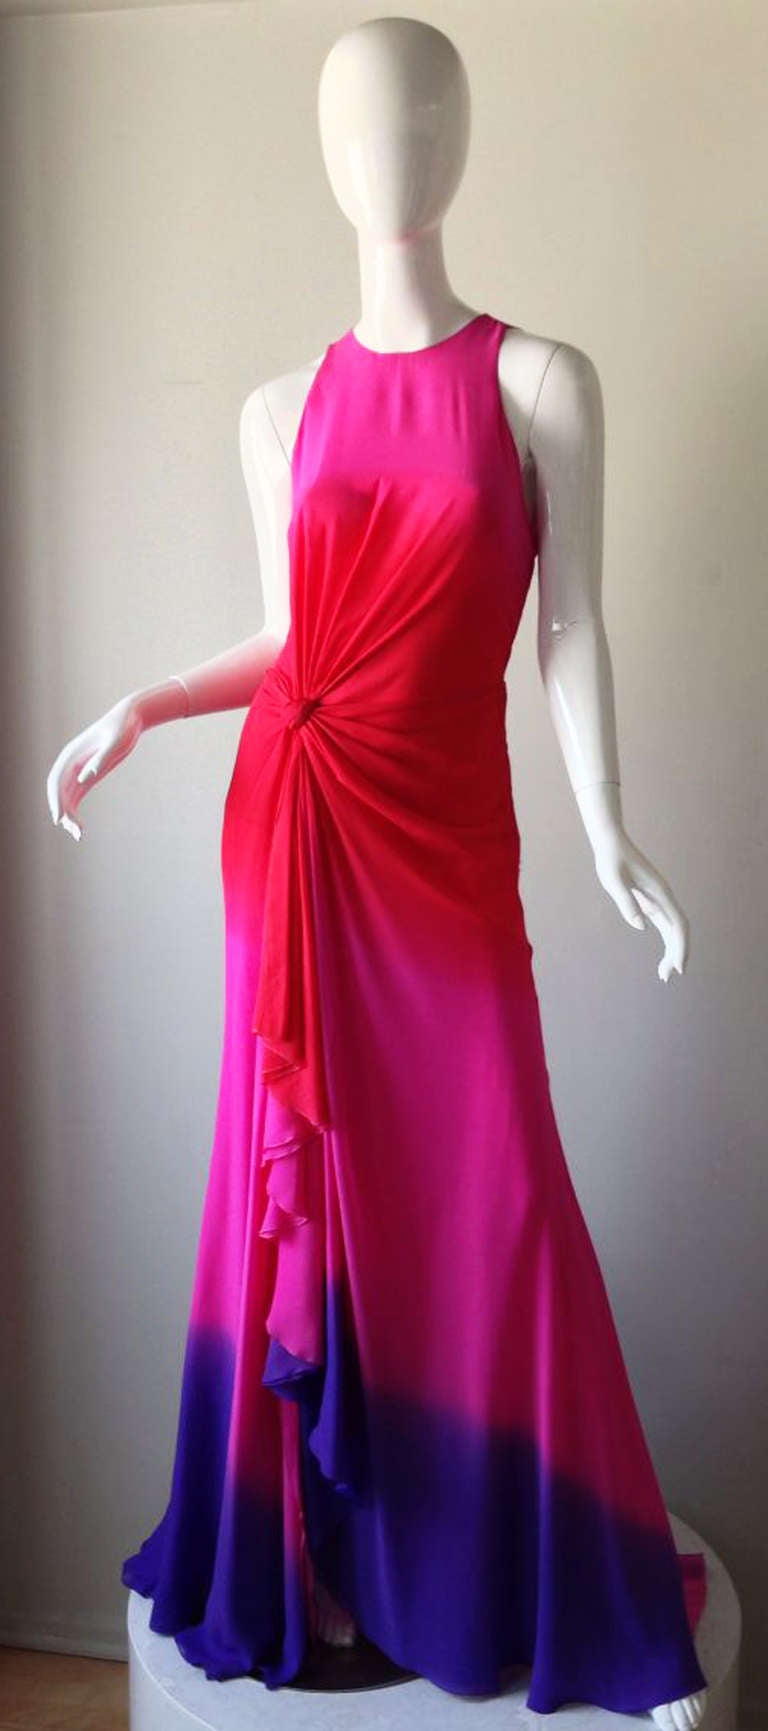 A gorgeous vintage Gianni Versace ombre silk gown. Exquisite royal purple to pink to red to pink dyed silk chiffon fabric (